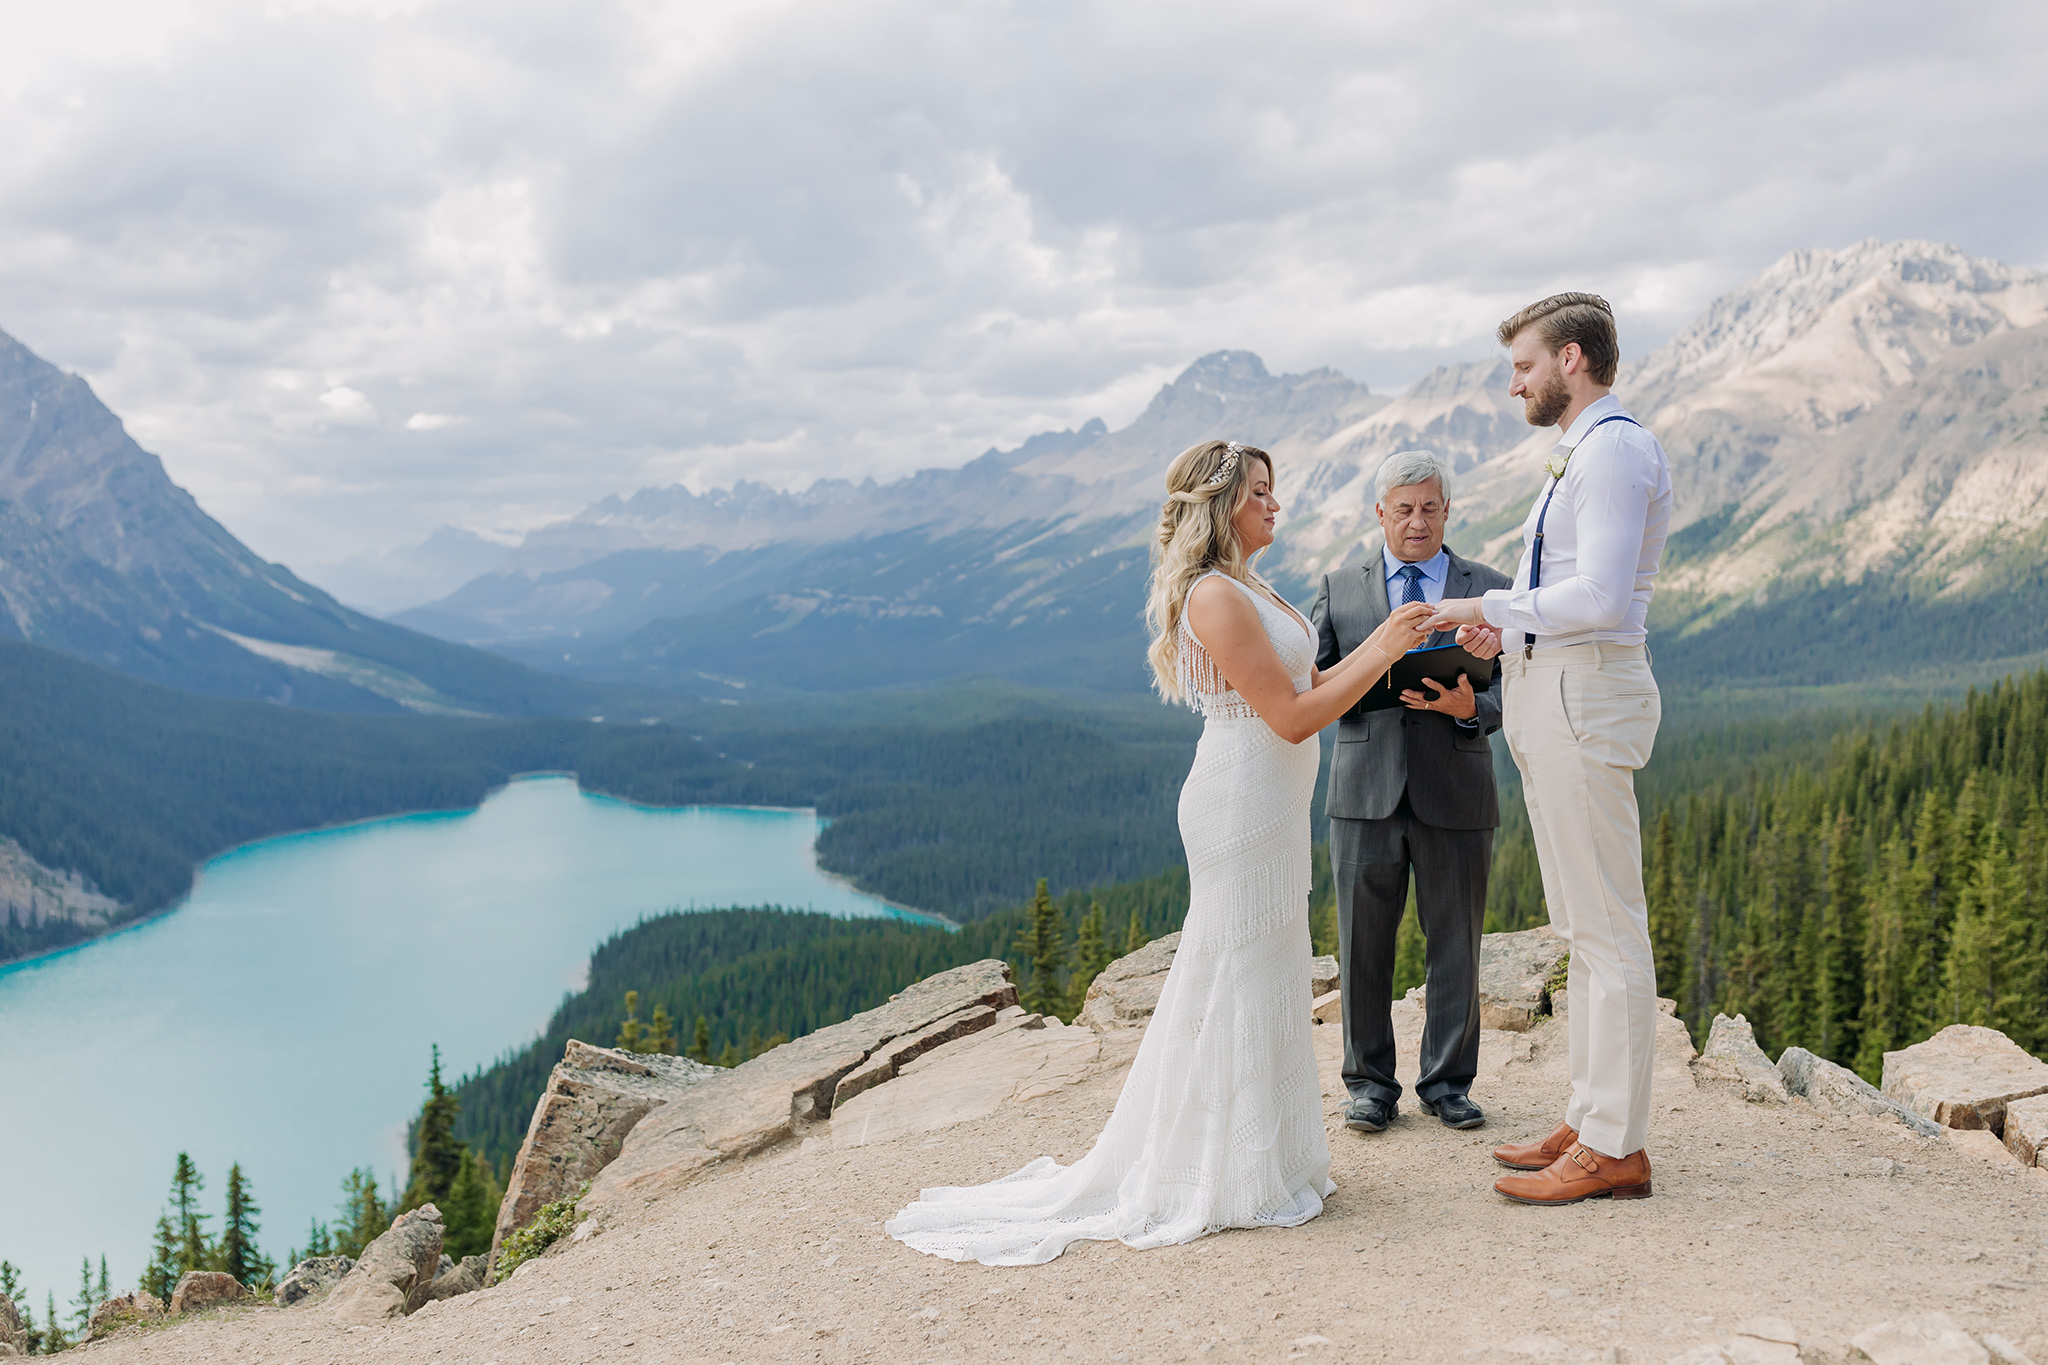 Peyto Lake Intimate wedding ceremony on Icefields Parkway surrounded by Mountains overlooking blue mountain Lake in the summer photographed my ENV Photography